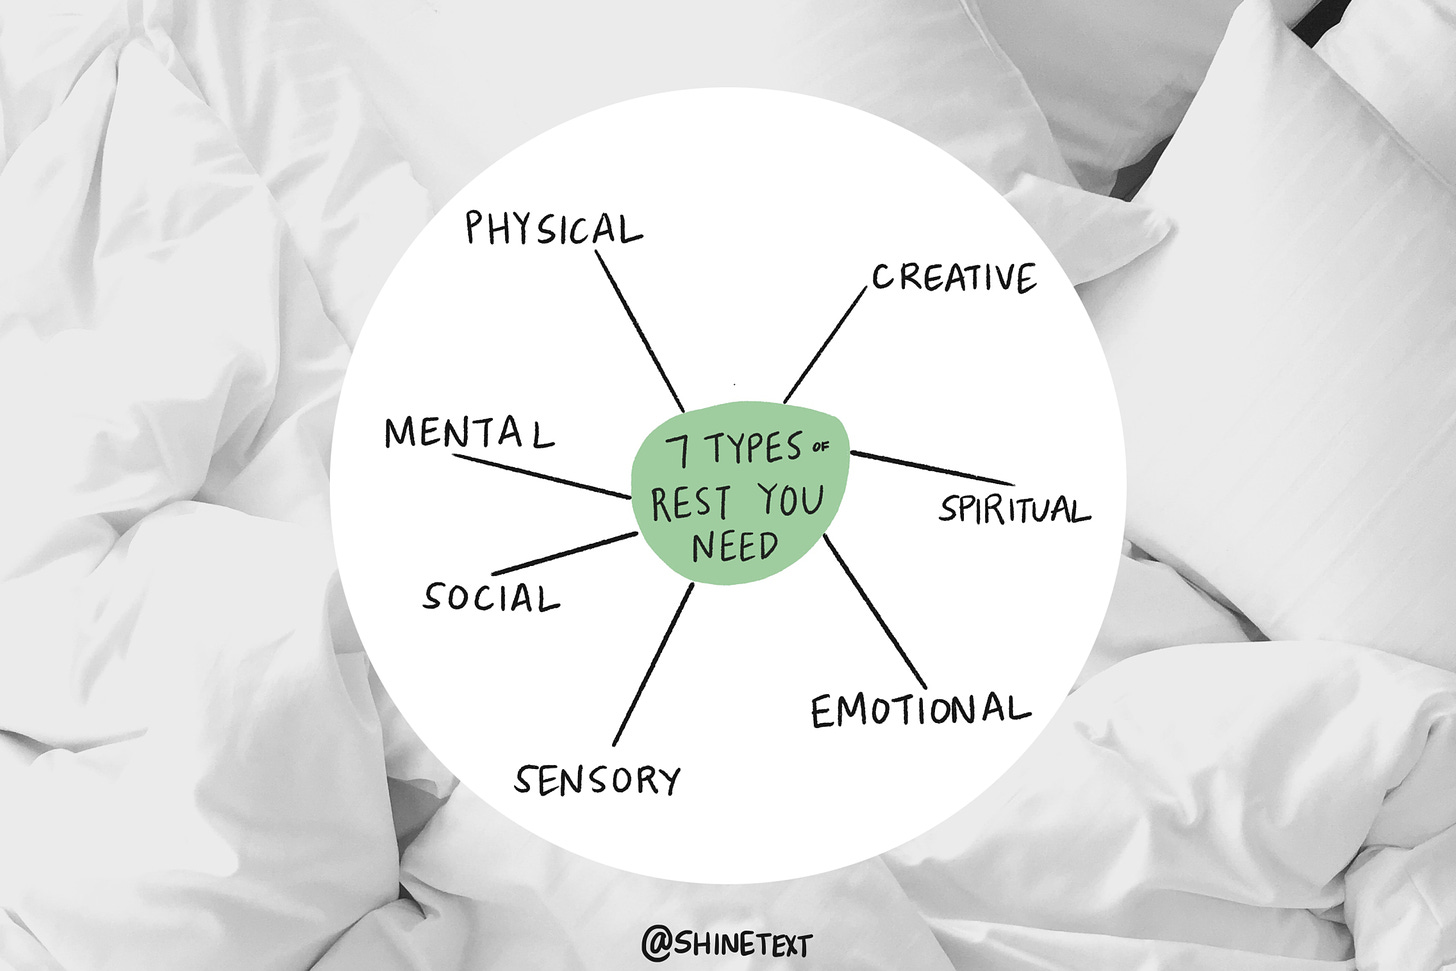 7 Types of Rest You Need To Feel Recharged